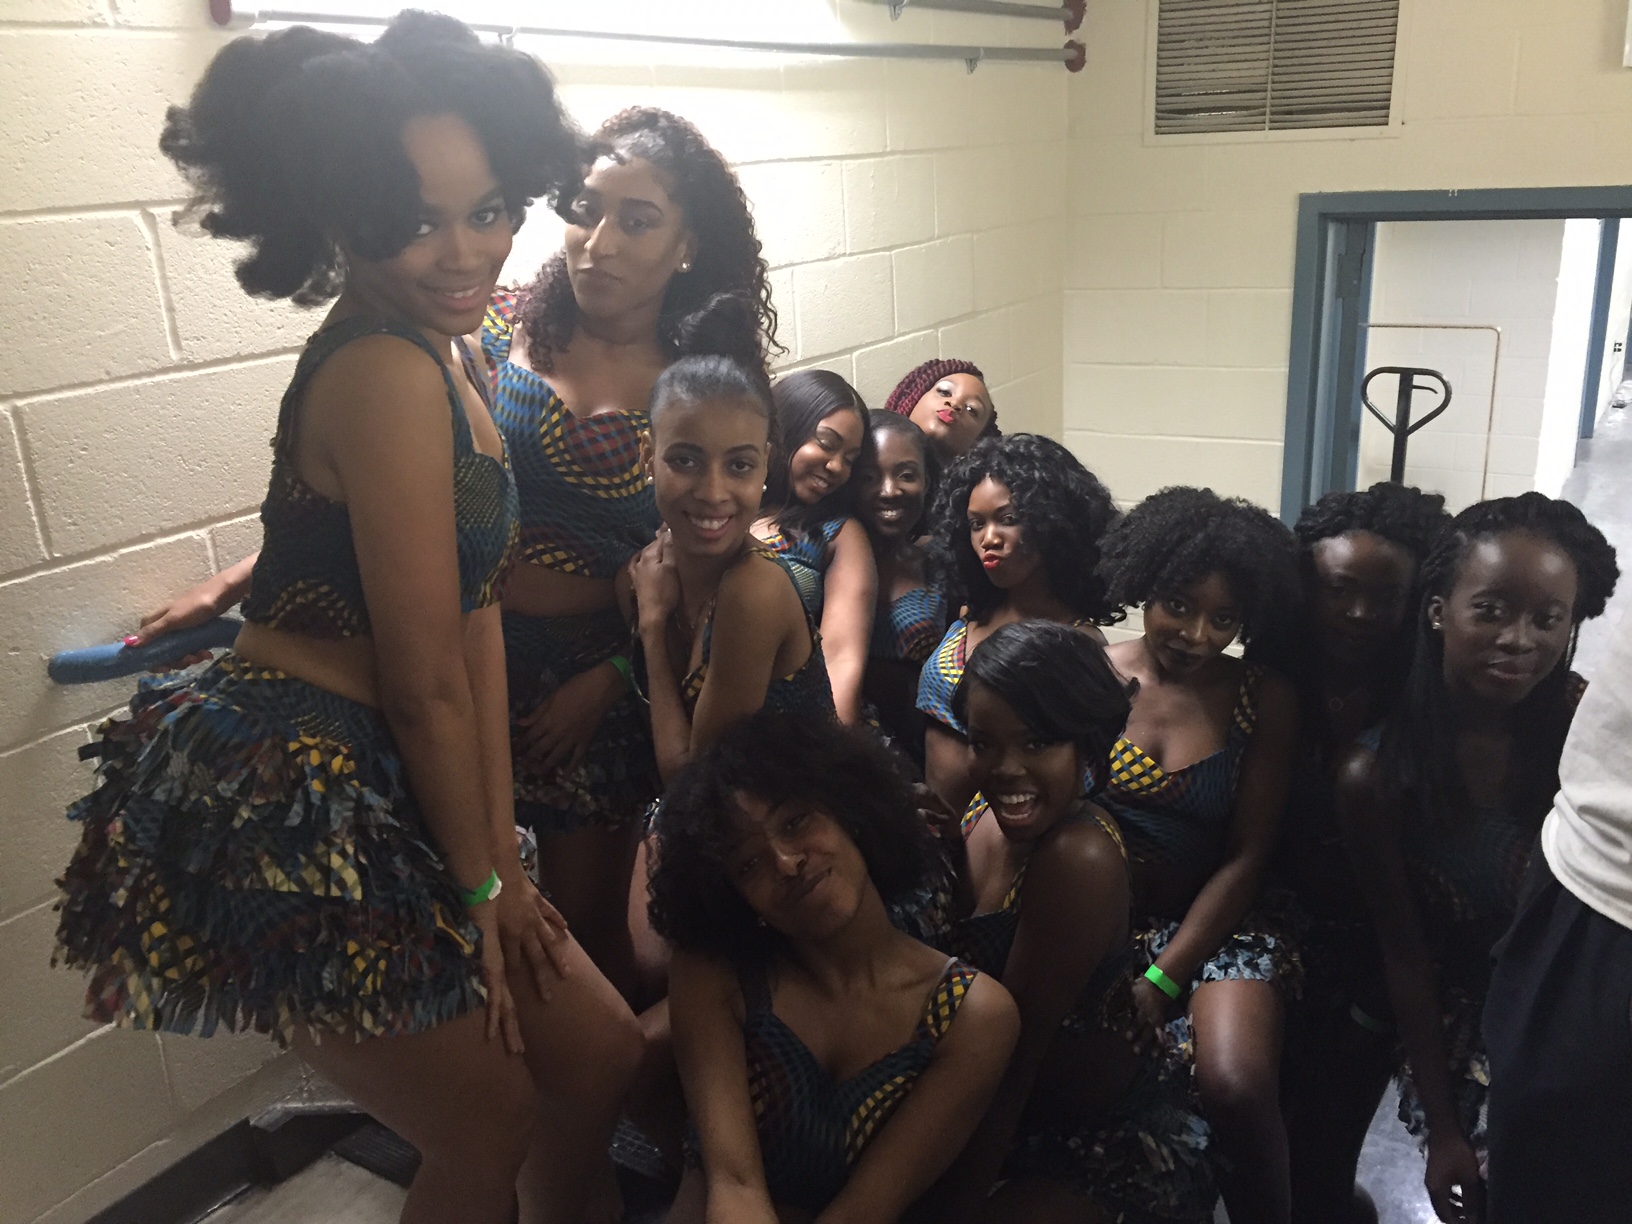 Performers of Afrique Unique backstage getting ready to preform. Photo By: Desaye Kenton